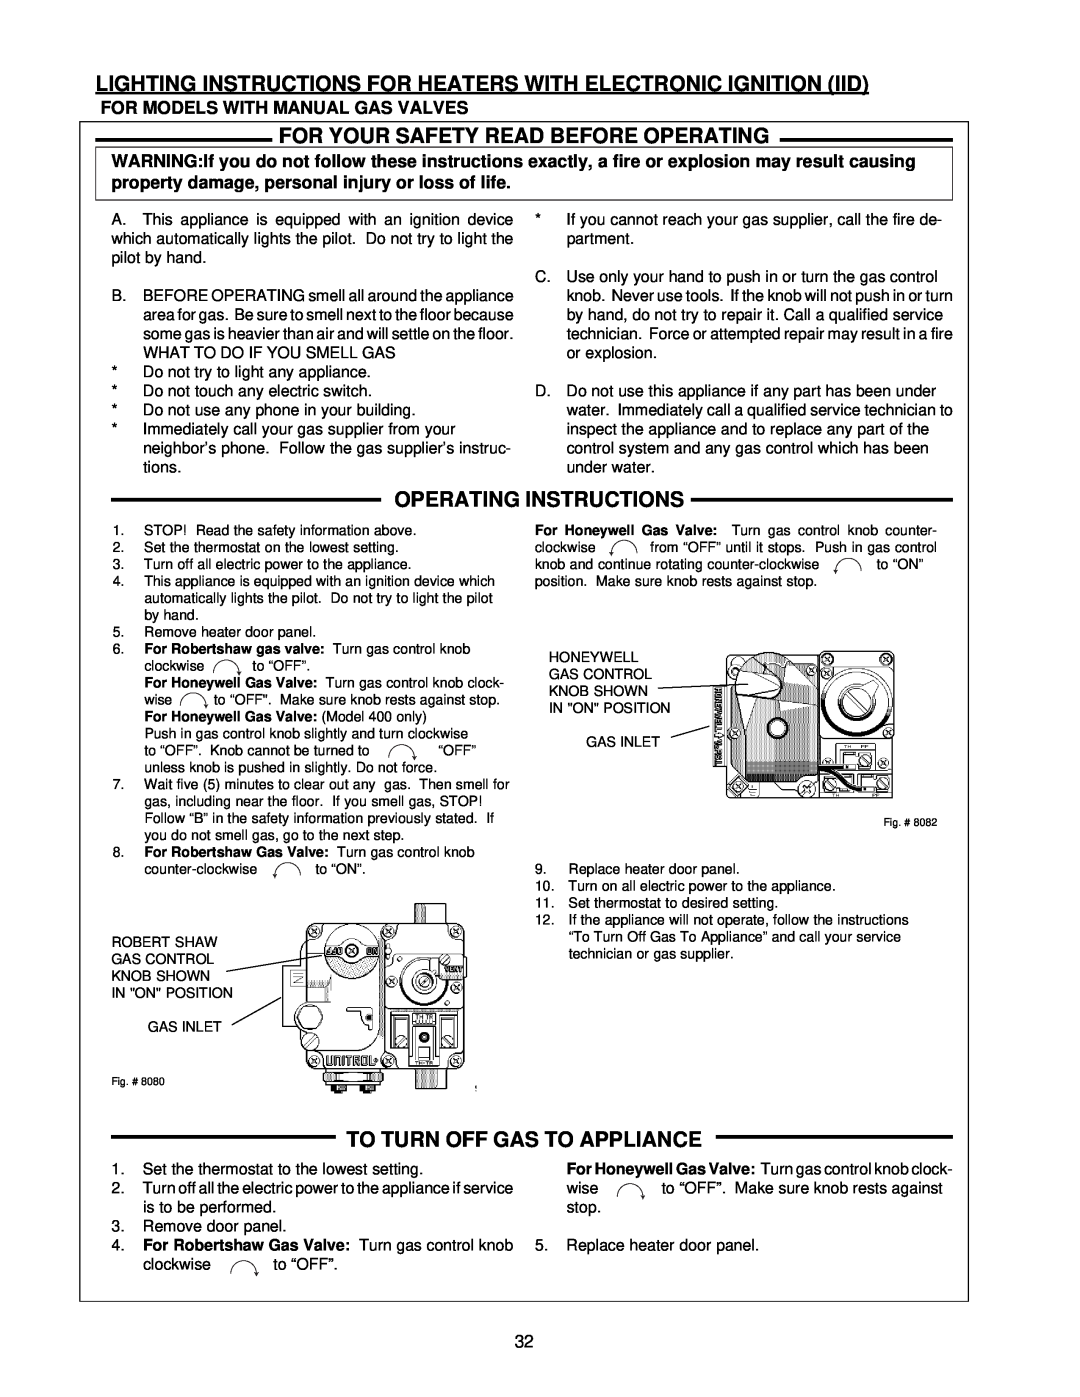 Raypak 0133-4001 manual For Your Safety Read Before Operating, Operating Instructions, To Turn Off Gas To Appliance 